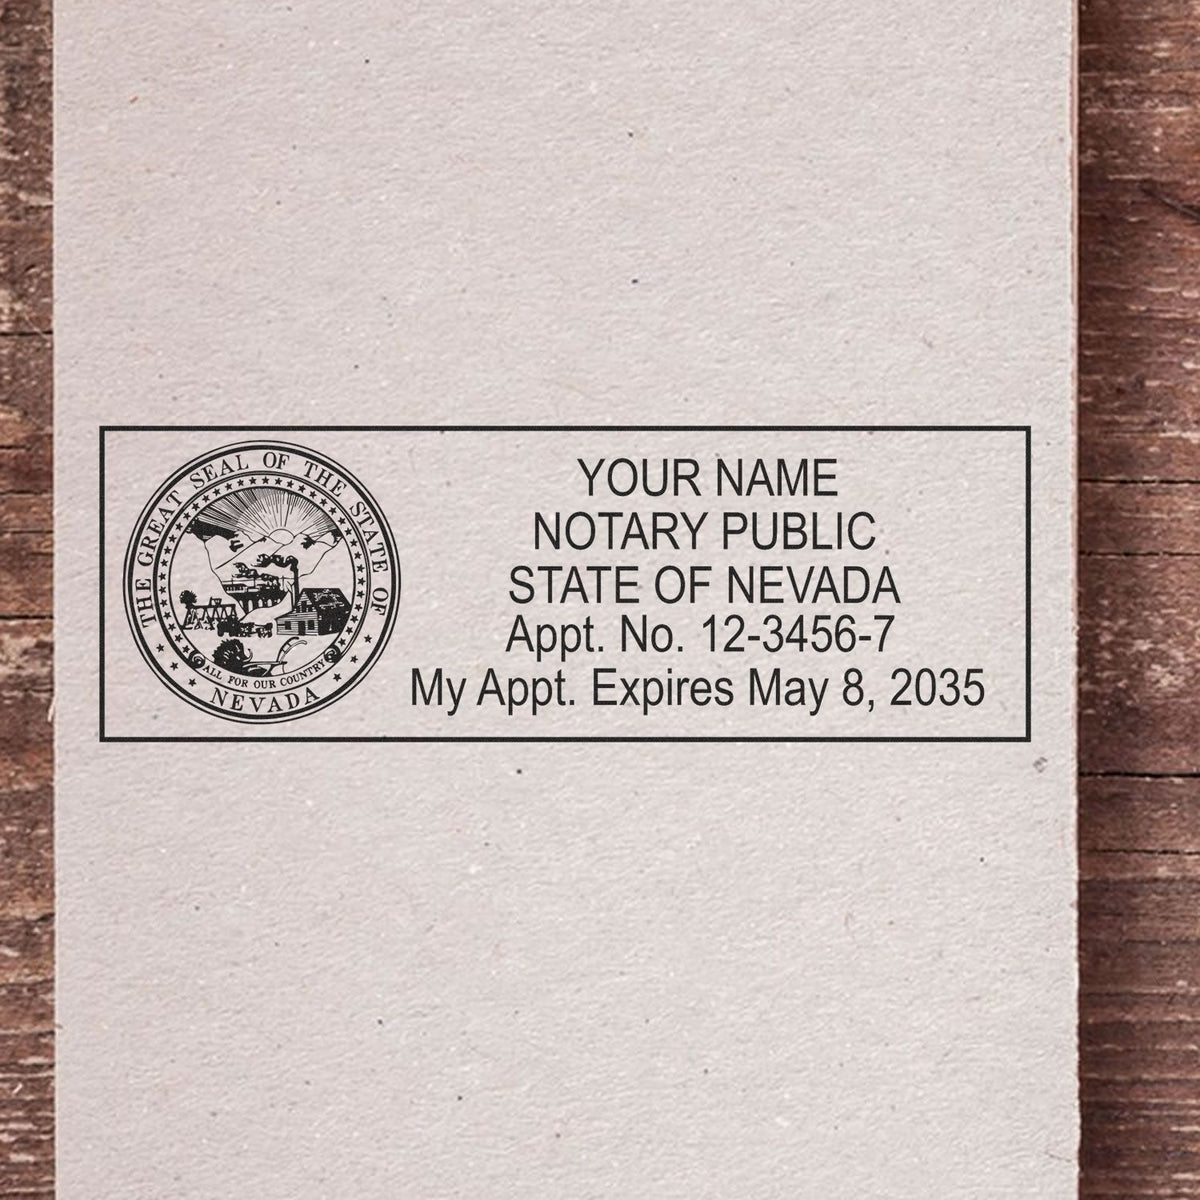 A photograph of the MaxLight Premium Pre-Inked Nevada State Seal Notarial Stamp stamp impression reveals a vivid, professional image of the on paper.